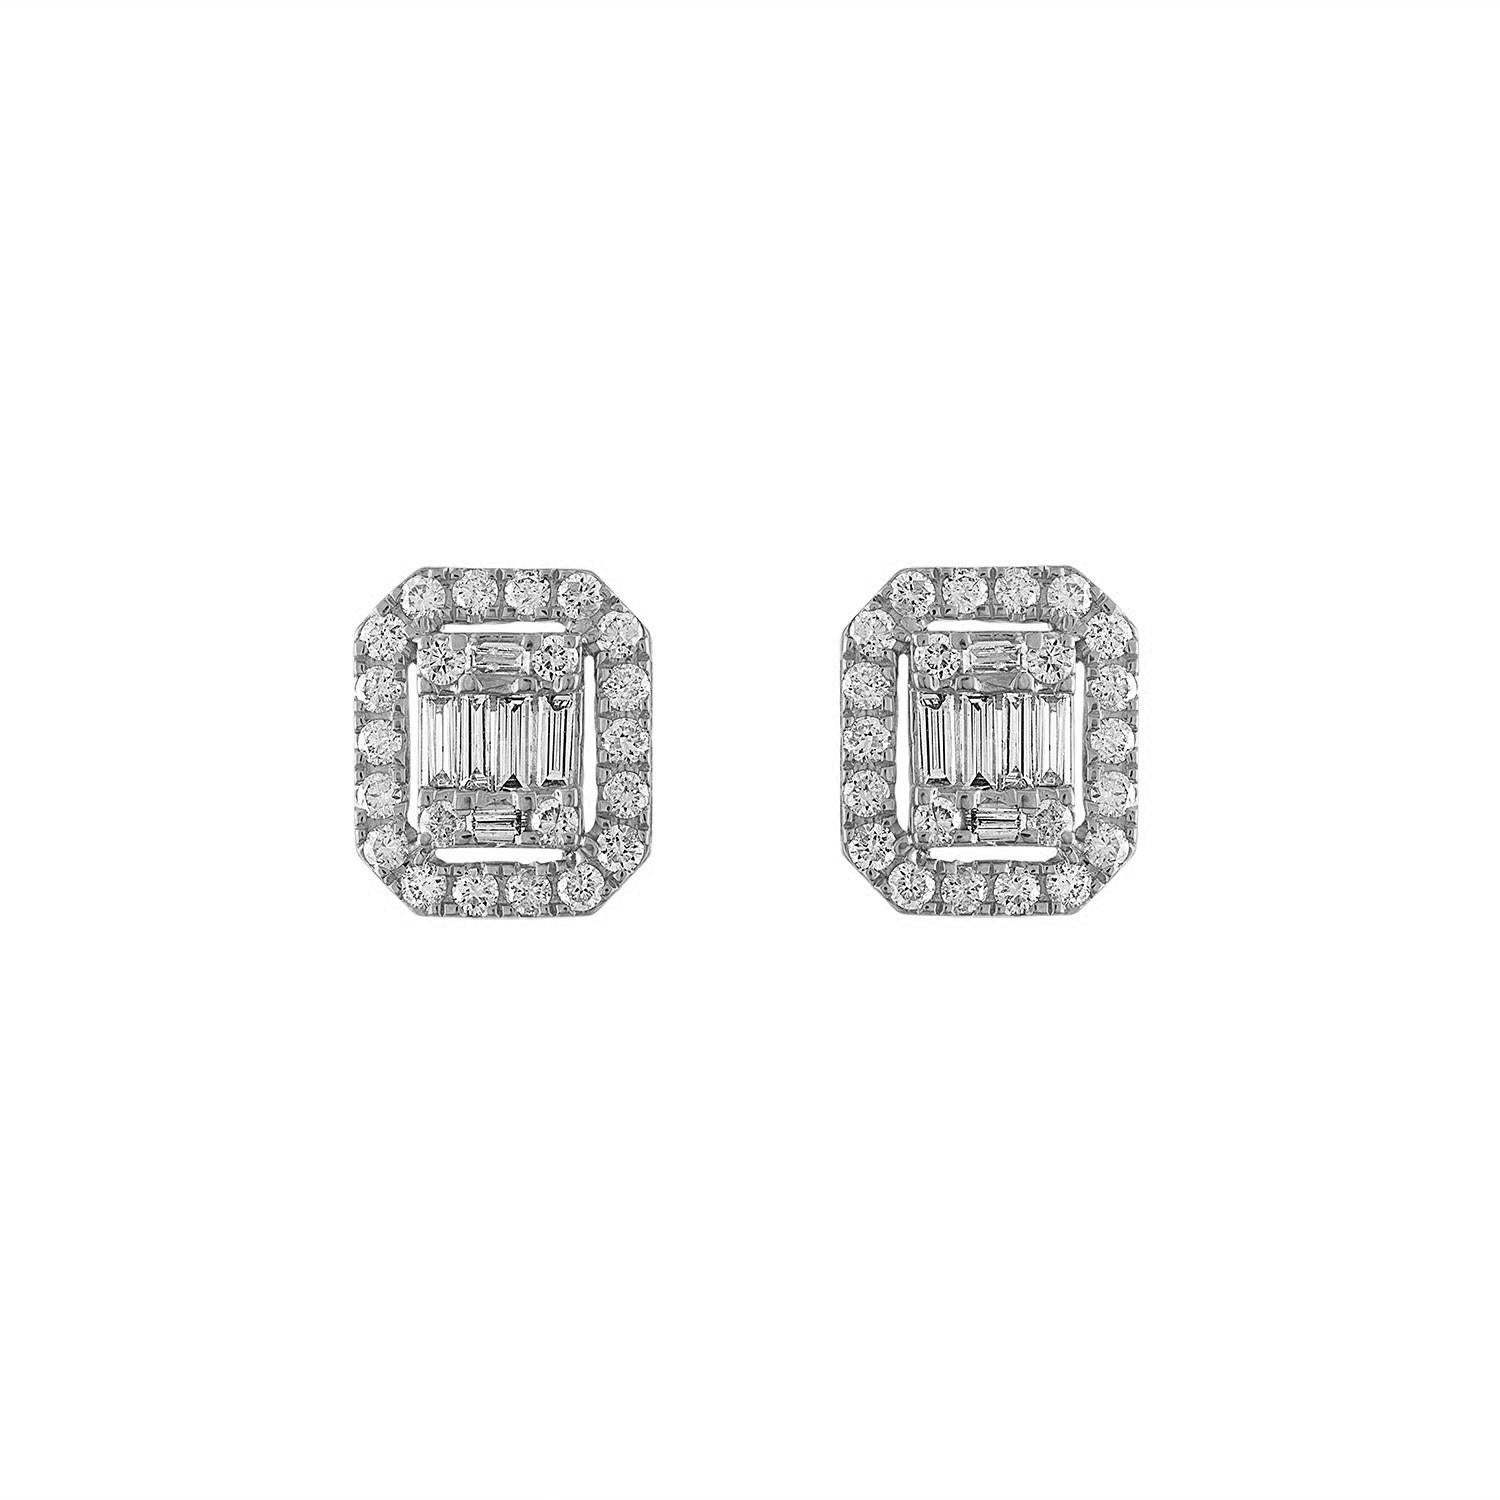 14K White Gold Diamond Earrings featuring 0.75 Carat T.W. of Natural Diamonds

Underline your look with this sharp 14K White Gold Diamond Earrings. High quality Diamonds. This Earrings will underline your exquisite look for any occasion.

. is a